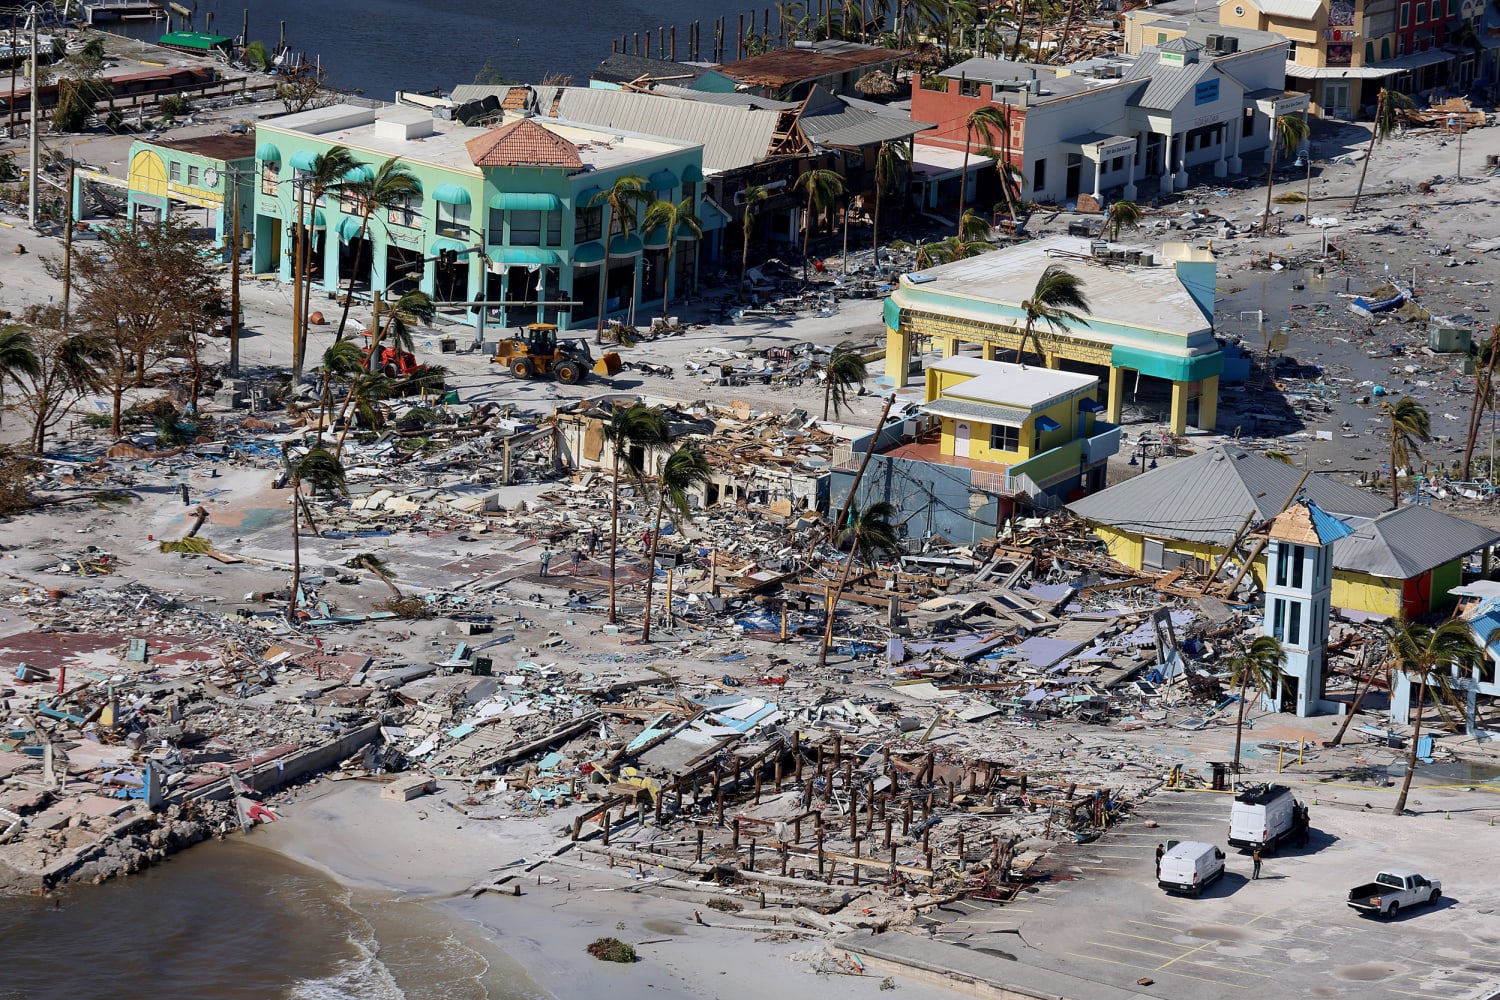 Hurricane Ian swept away a motel with 8 people trapped inside image